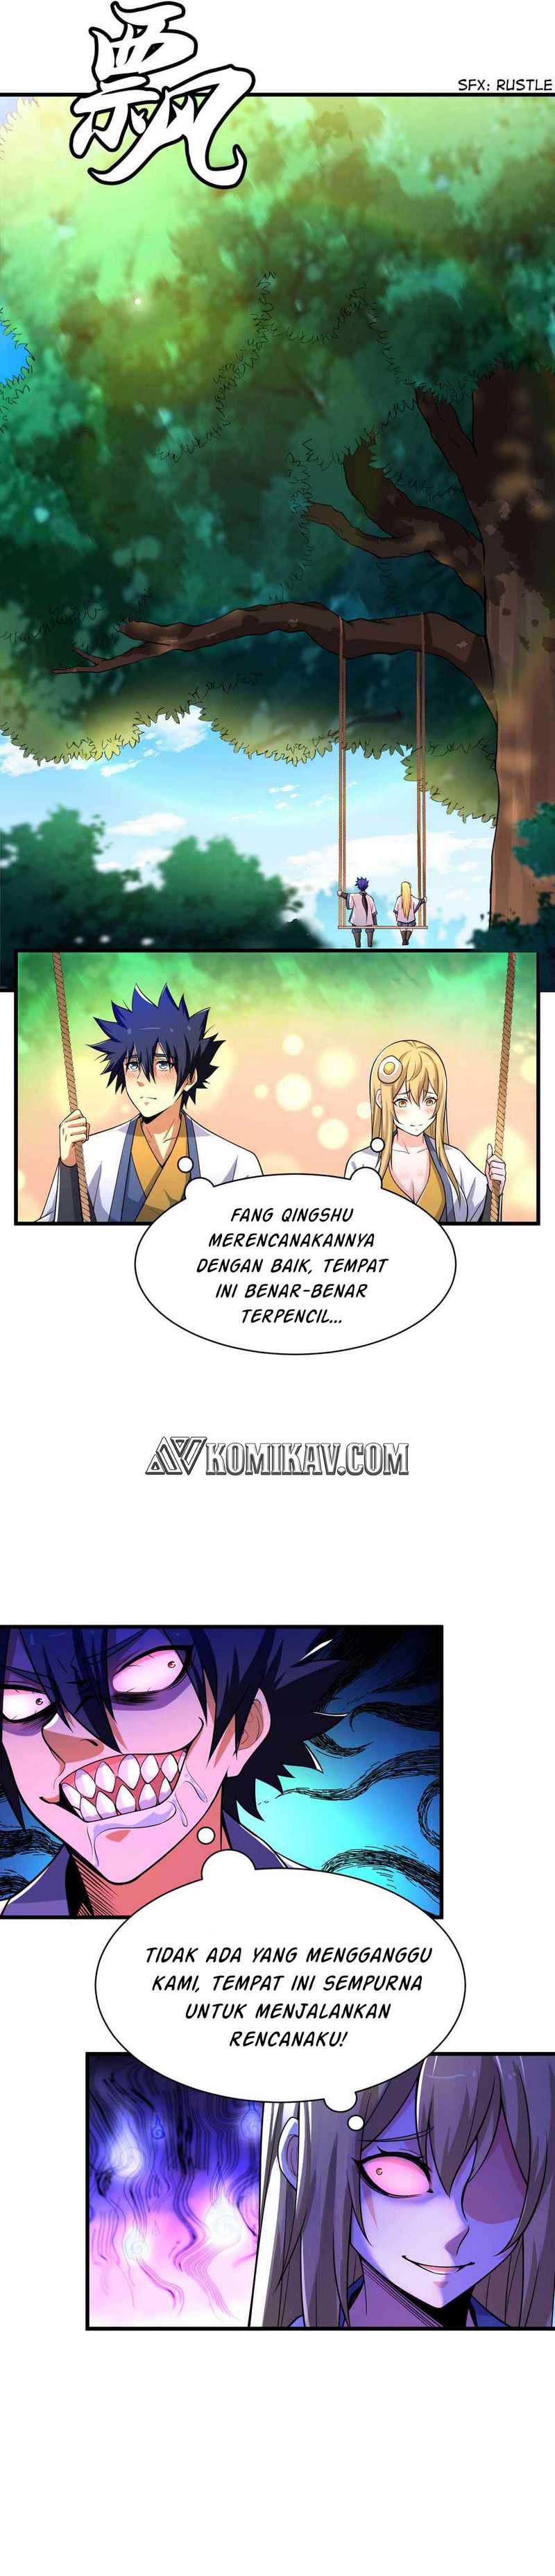 Dilarang COPAS - situs resmi www.mangacanblog.com - Komik i just want to be beaten to death by everyone 053 - chapter 53 54 Indonesia i just want to be beaten to death by everyone 053 - chapter 53 Terbaru 2|Baca Manga Komik Indonesia|Mangacan